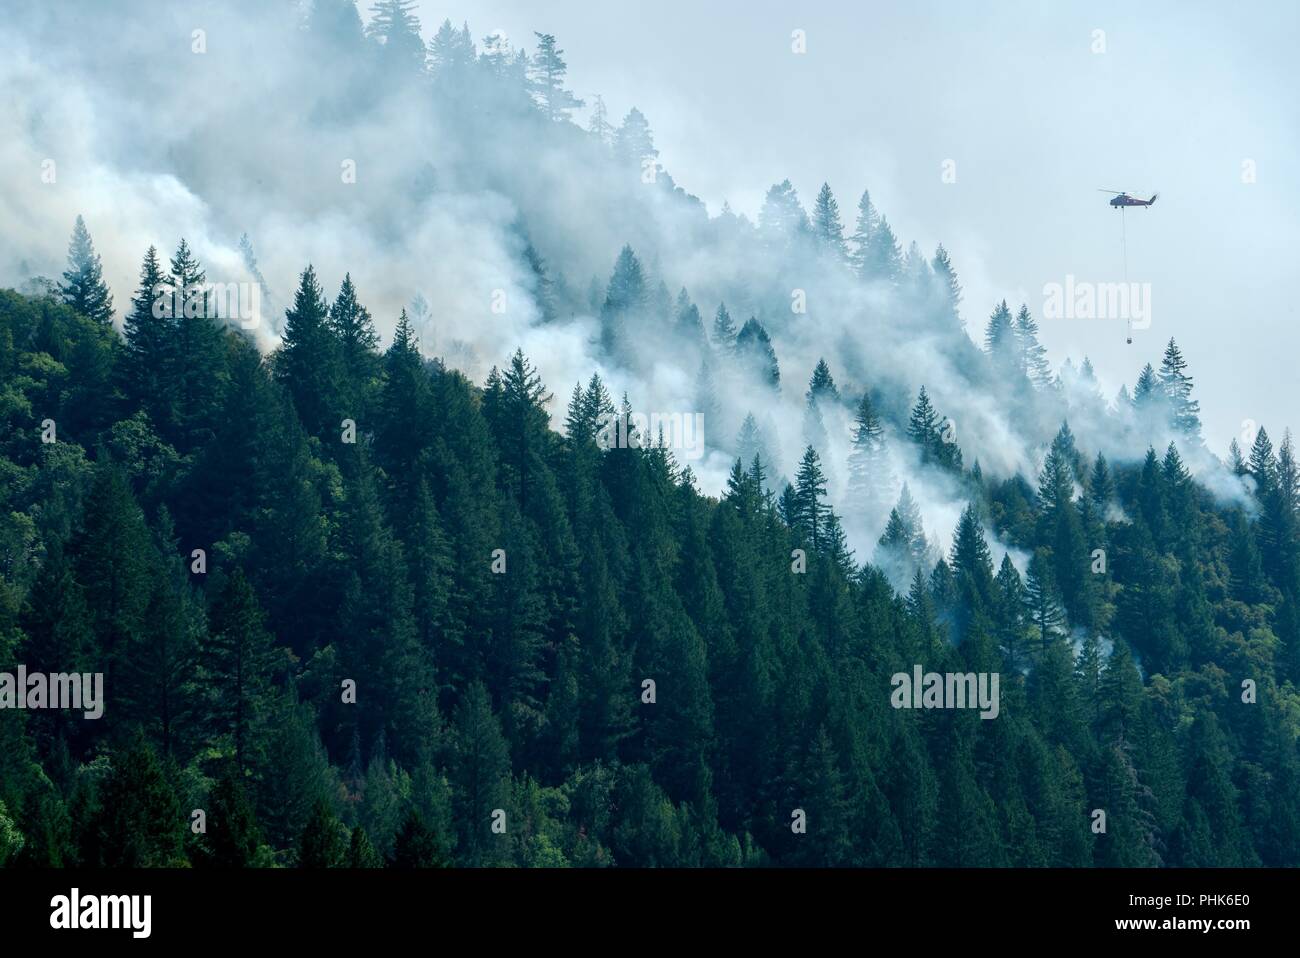 A helicopter carries a bambi bucket with water onto the forest fires at the Mendocino National Forest August 16, 2018 near Willows, California. The Mendocino Complex fire destroyed 157 homes, killed one firefighter and burned 459,102 acres becoming the largest wildfire in California history. Stock Photo